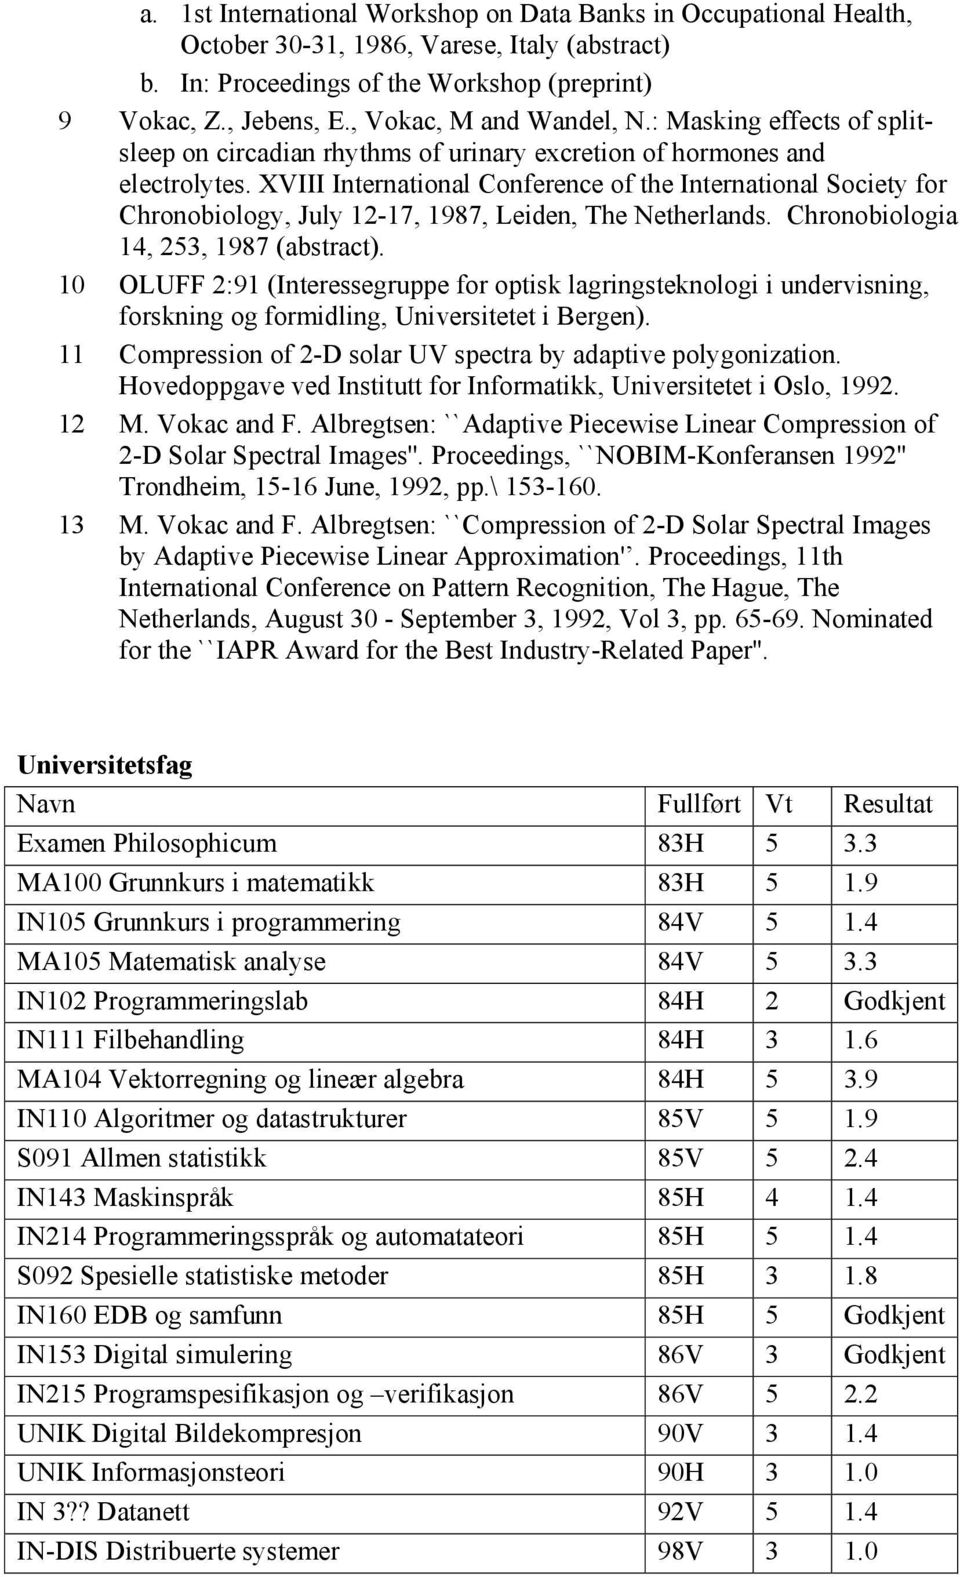 XVIII International Conference of the International Society for Chronobiology, July 12-17, 1987, Leiden, The Netherlands. Chronobiologia 14, 253, 1987 (abstract).